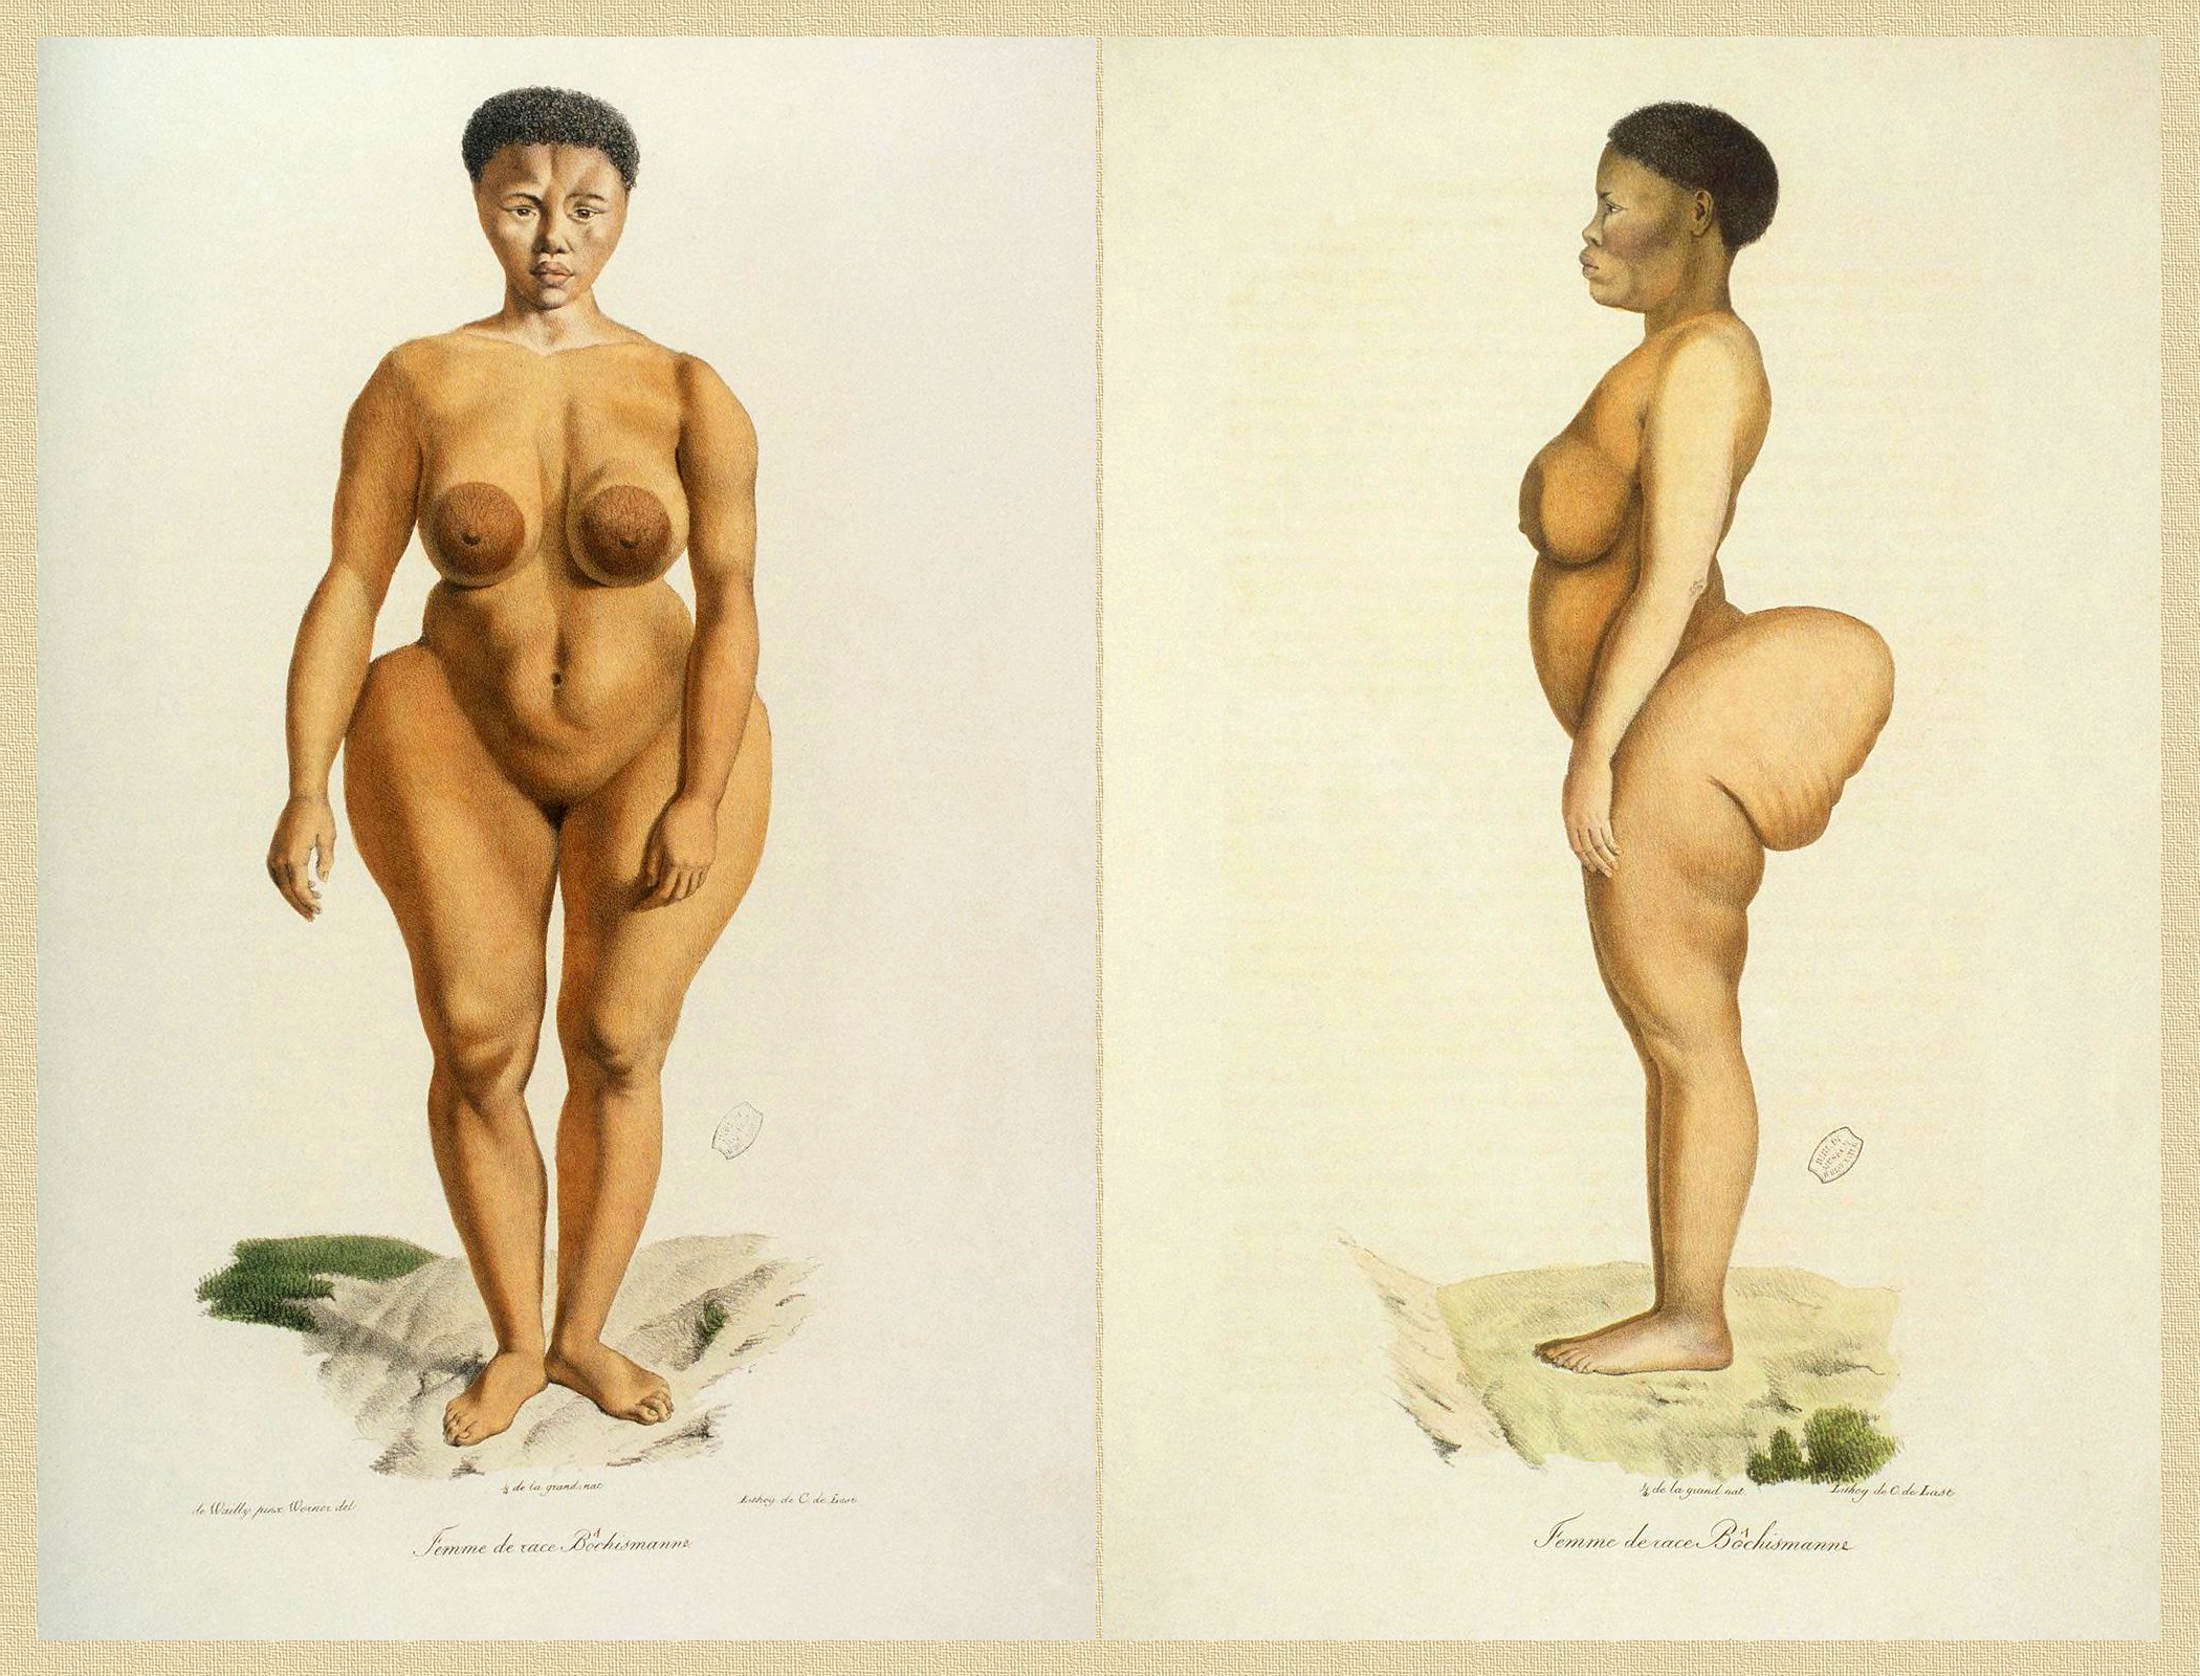 Sawtche, named Sarah "Saartjie" Baartman in Europe (ca.1790 - 1815), called the Hottentot Venus, captured in South Africa, exhibited in Europe as a freak show attraction, forced into prostitution, studied as a specimen of "Woman of race Bôchismann" in 1815 by Étienne Geoffroy Saint-Hilaire and Georges Cuvier, which deduced theories on the inferiority of some human races. [Image and caption courtesy of Wikimedia]